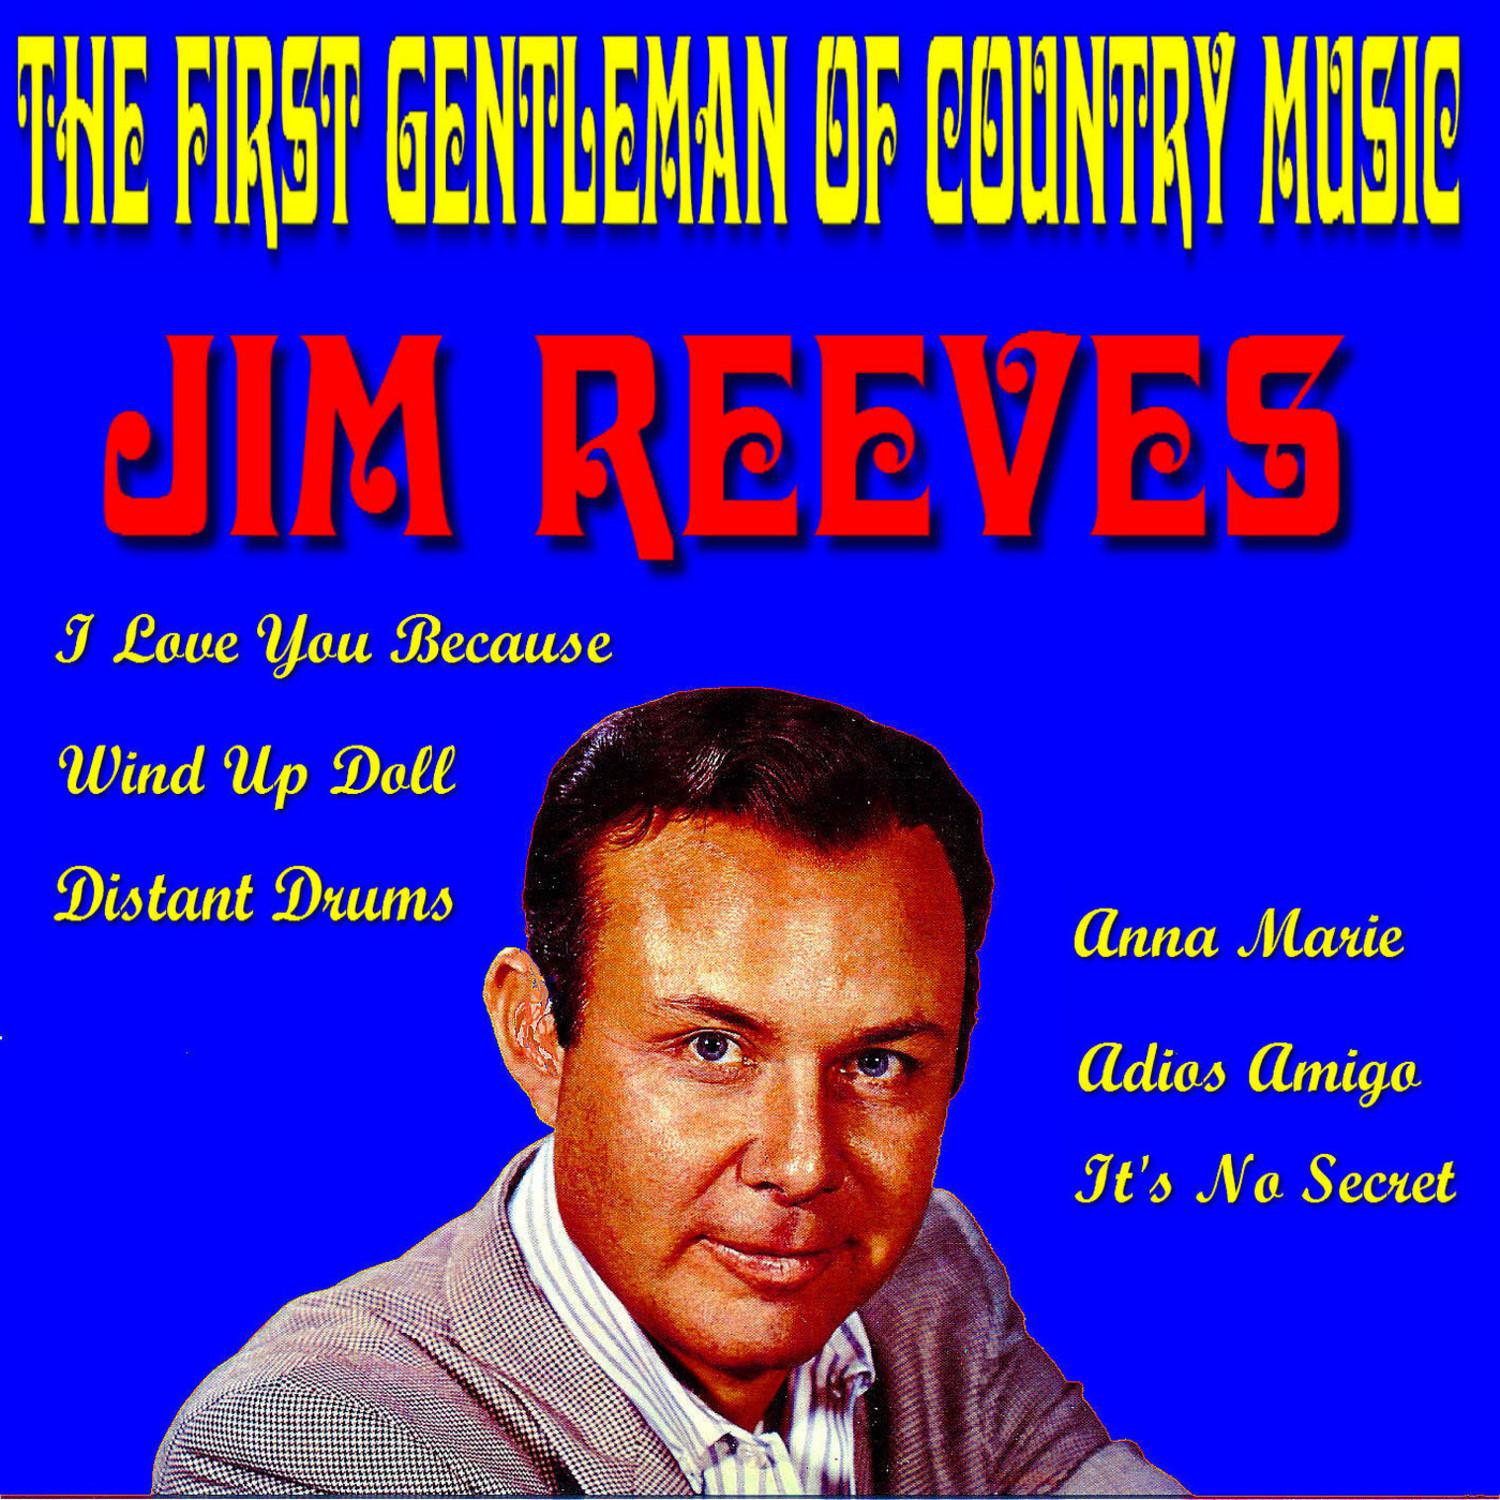 The First Gentleman of Country Music